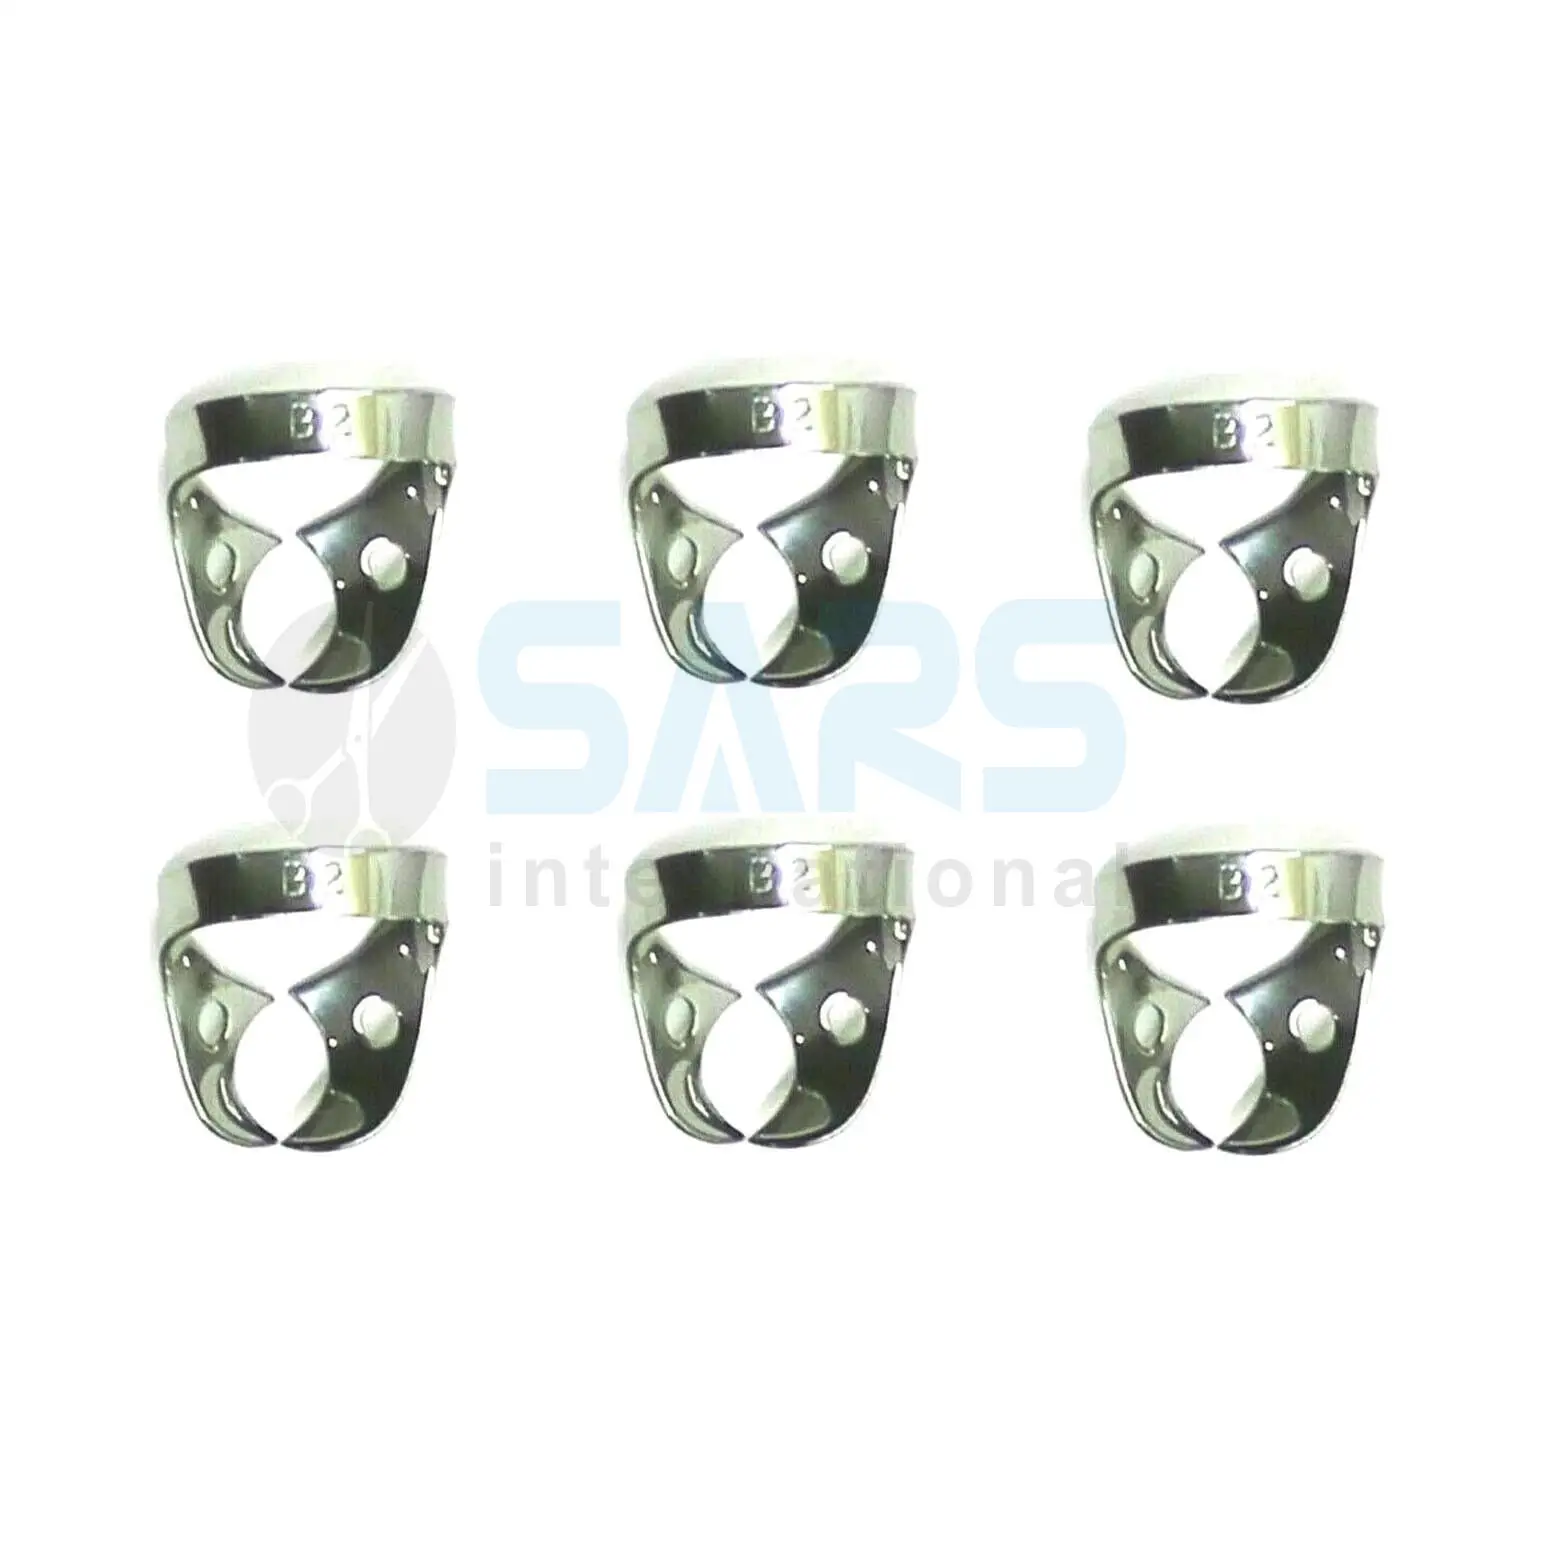 high rank and top quality 6 Pcs Dental Rubber Dam Clamps B2 Brinker Endodontic Clamps Surgical Instruments